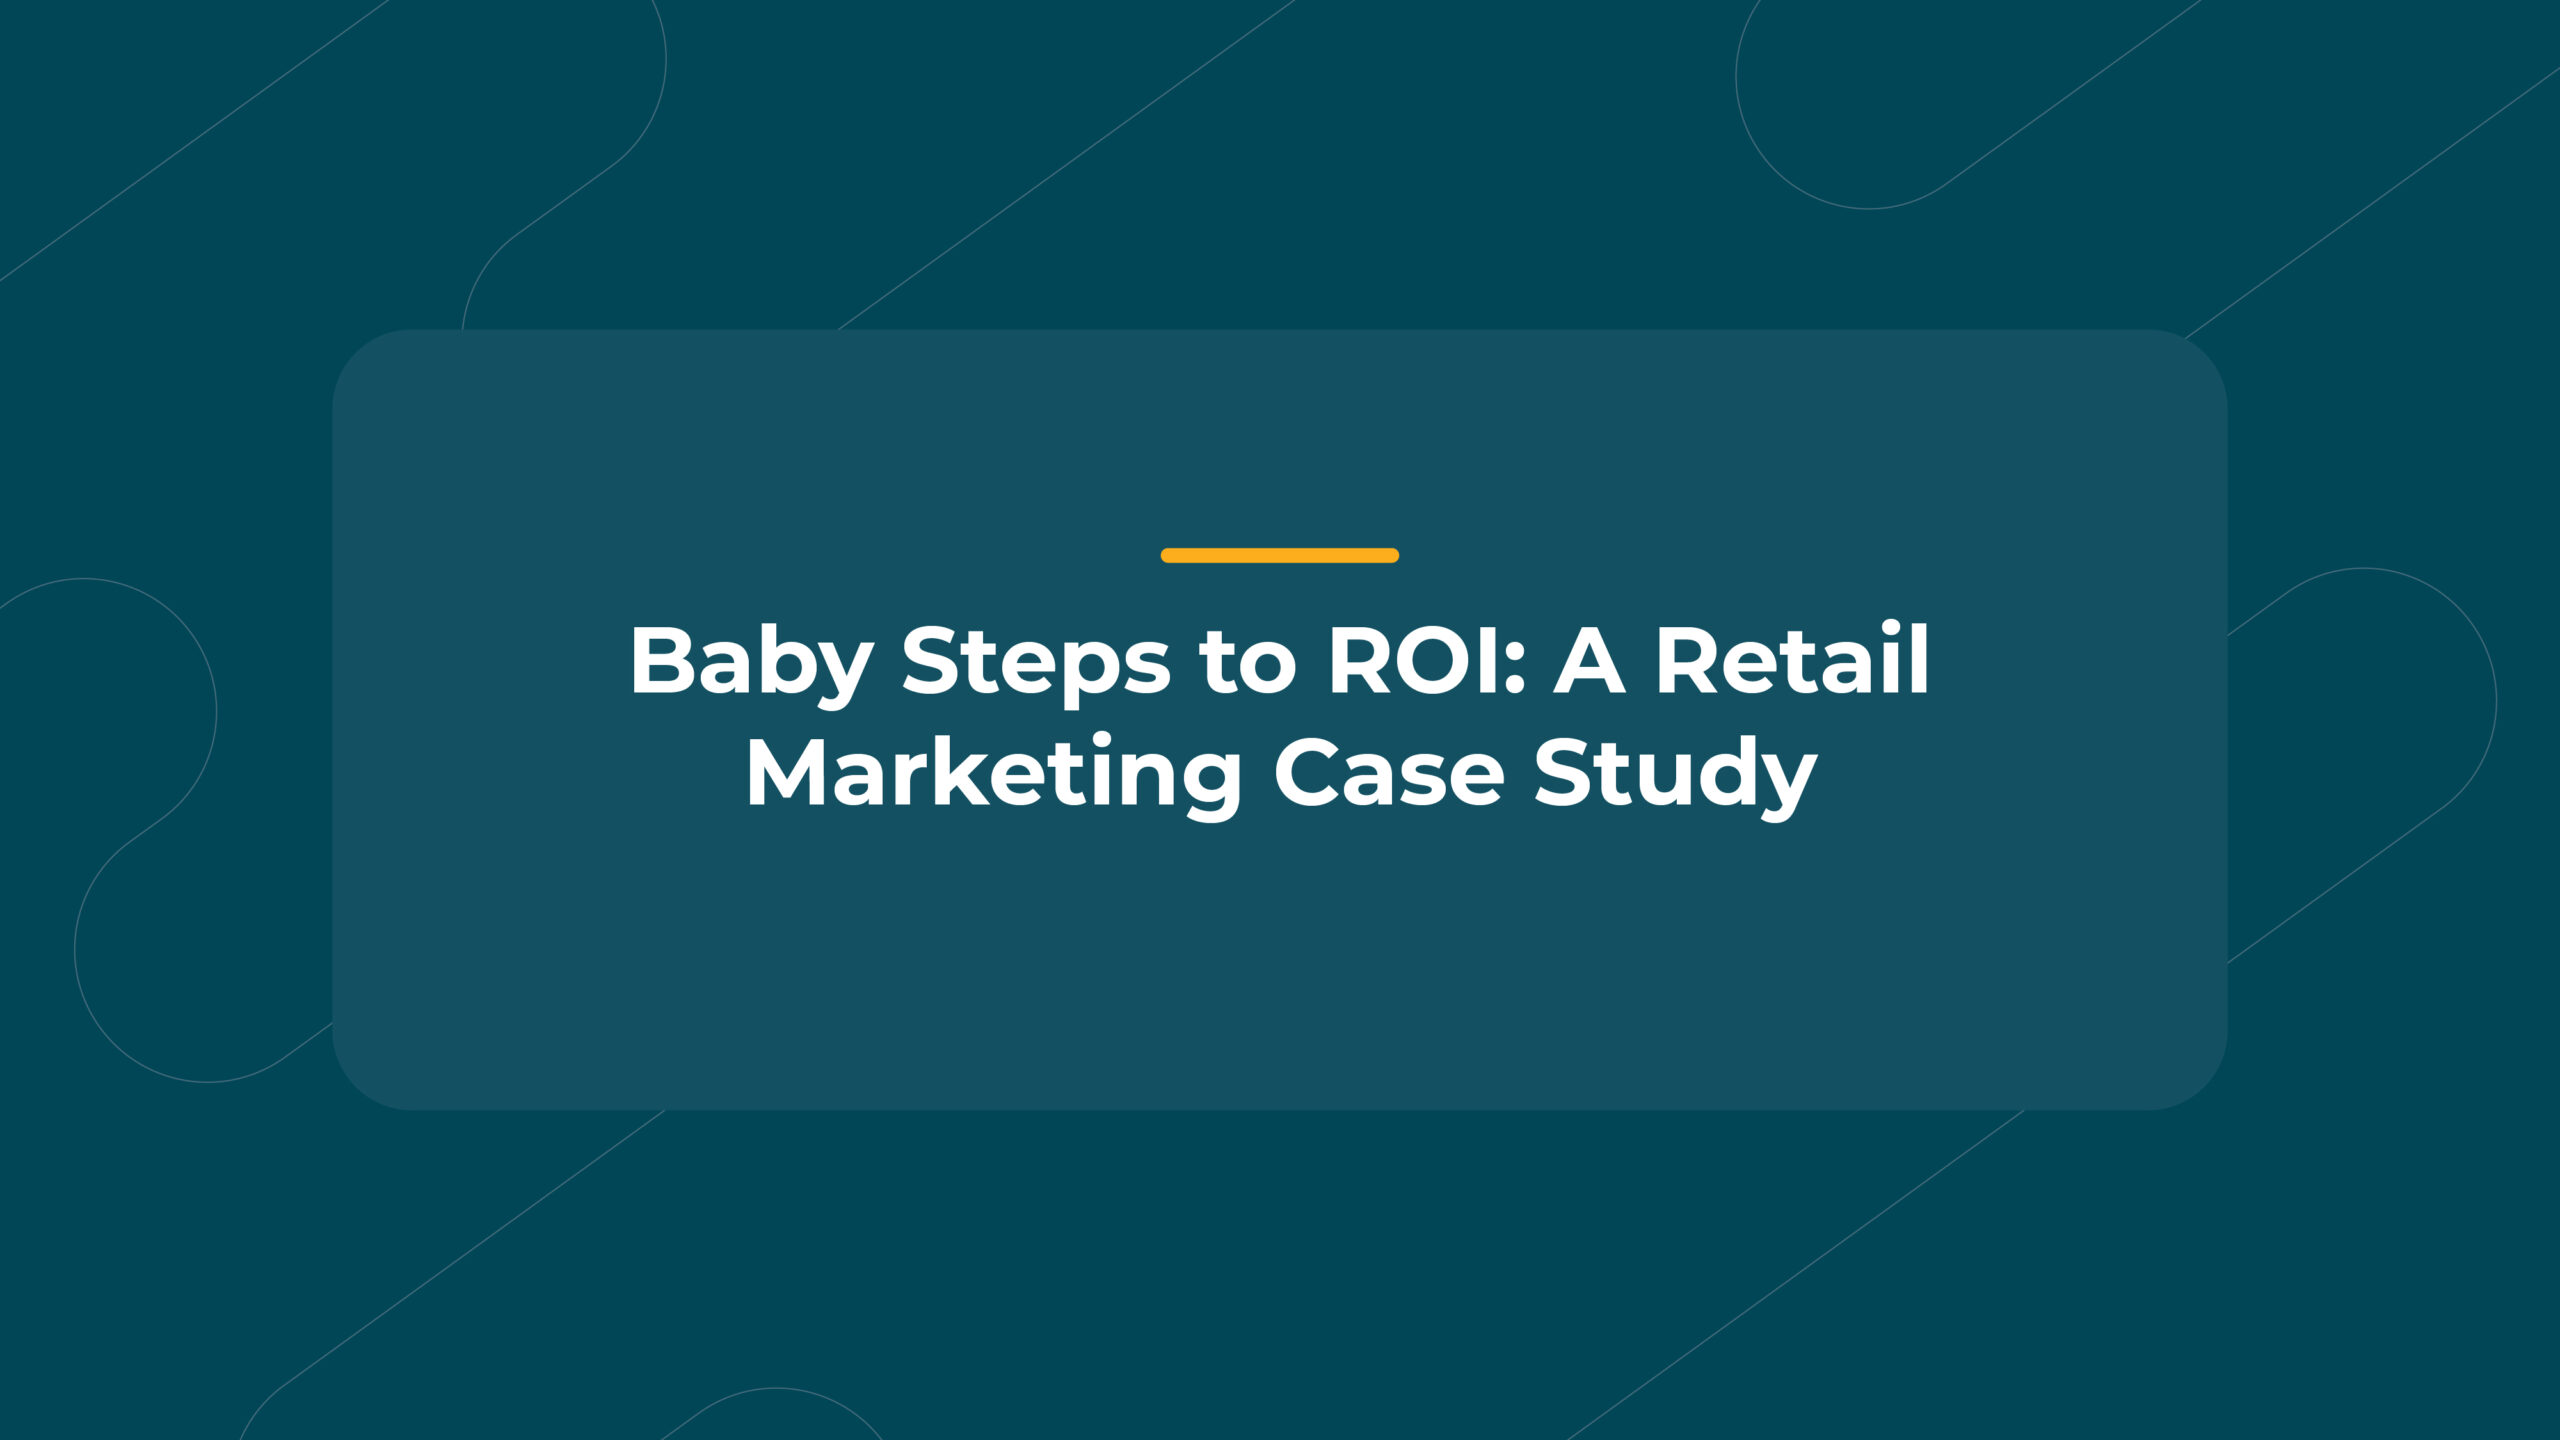 Baby Steps to ROI: A Retail Marketing Case Study